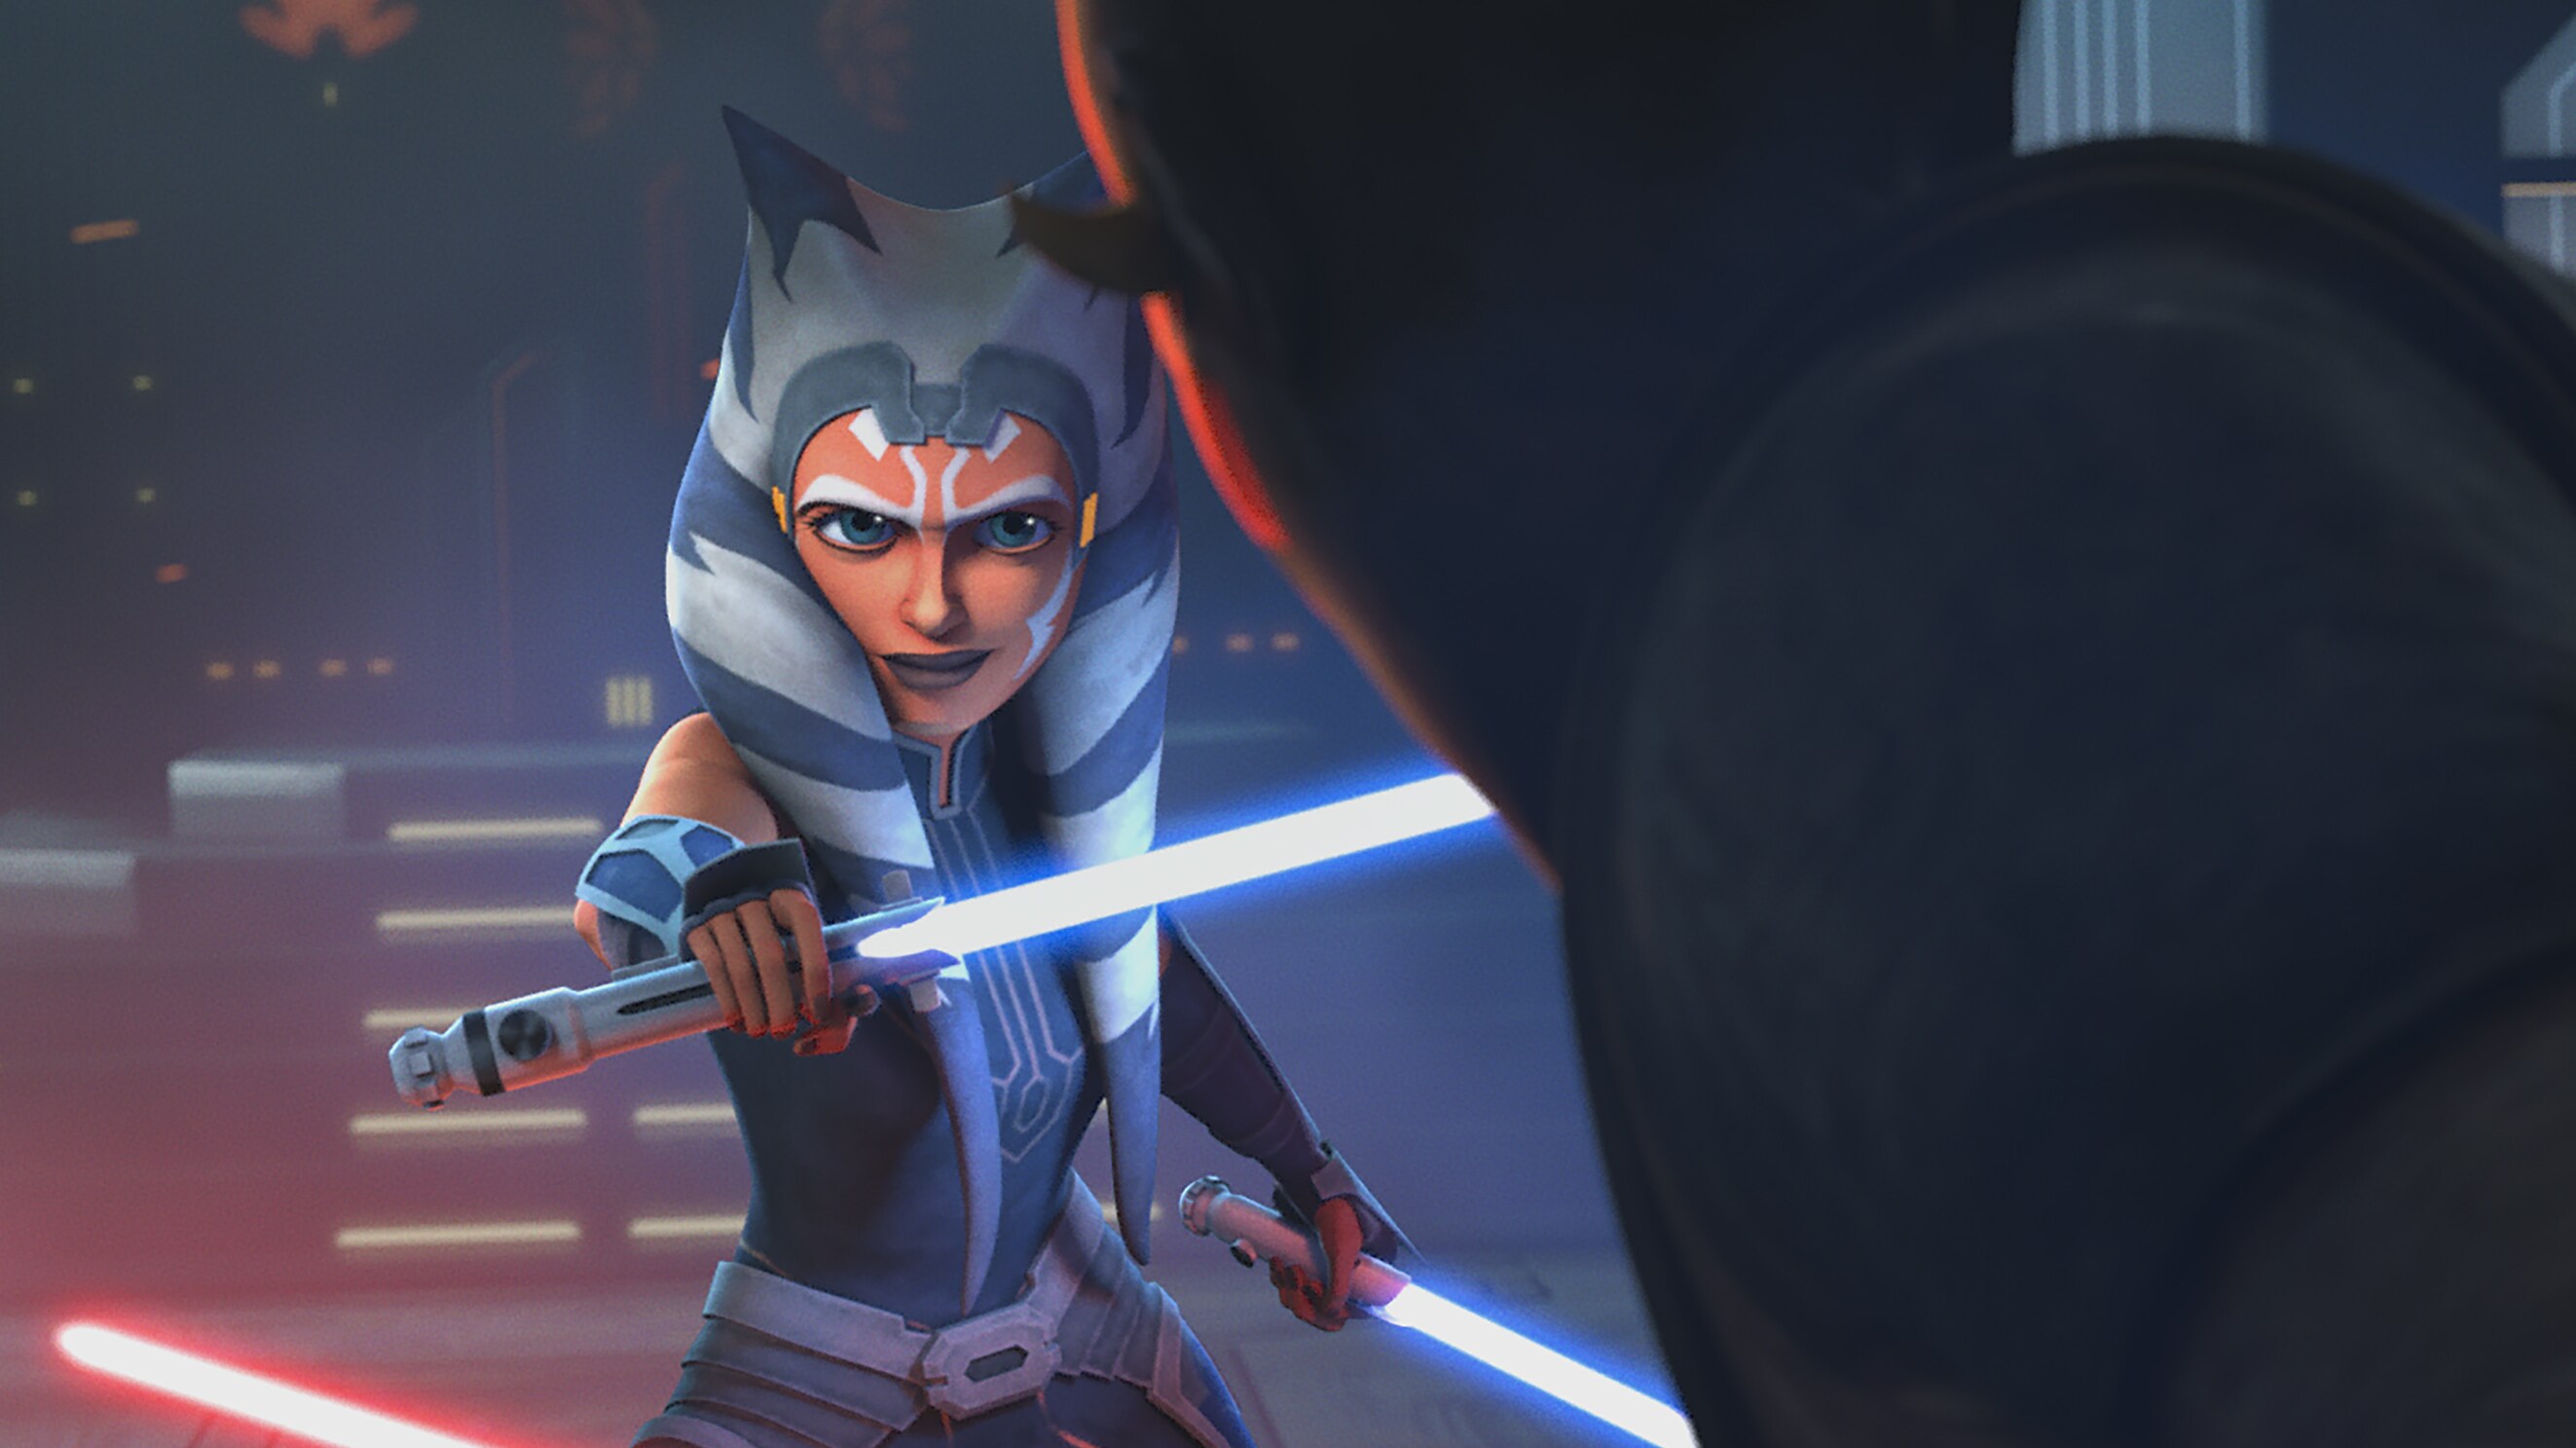 Ahsoka Tano and Maul in STAR WARS: THE CLONE WARS, exclusively on Disney+.